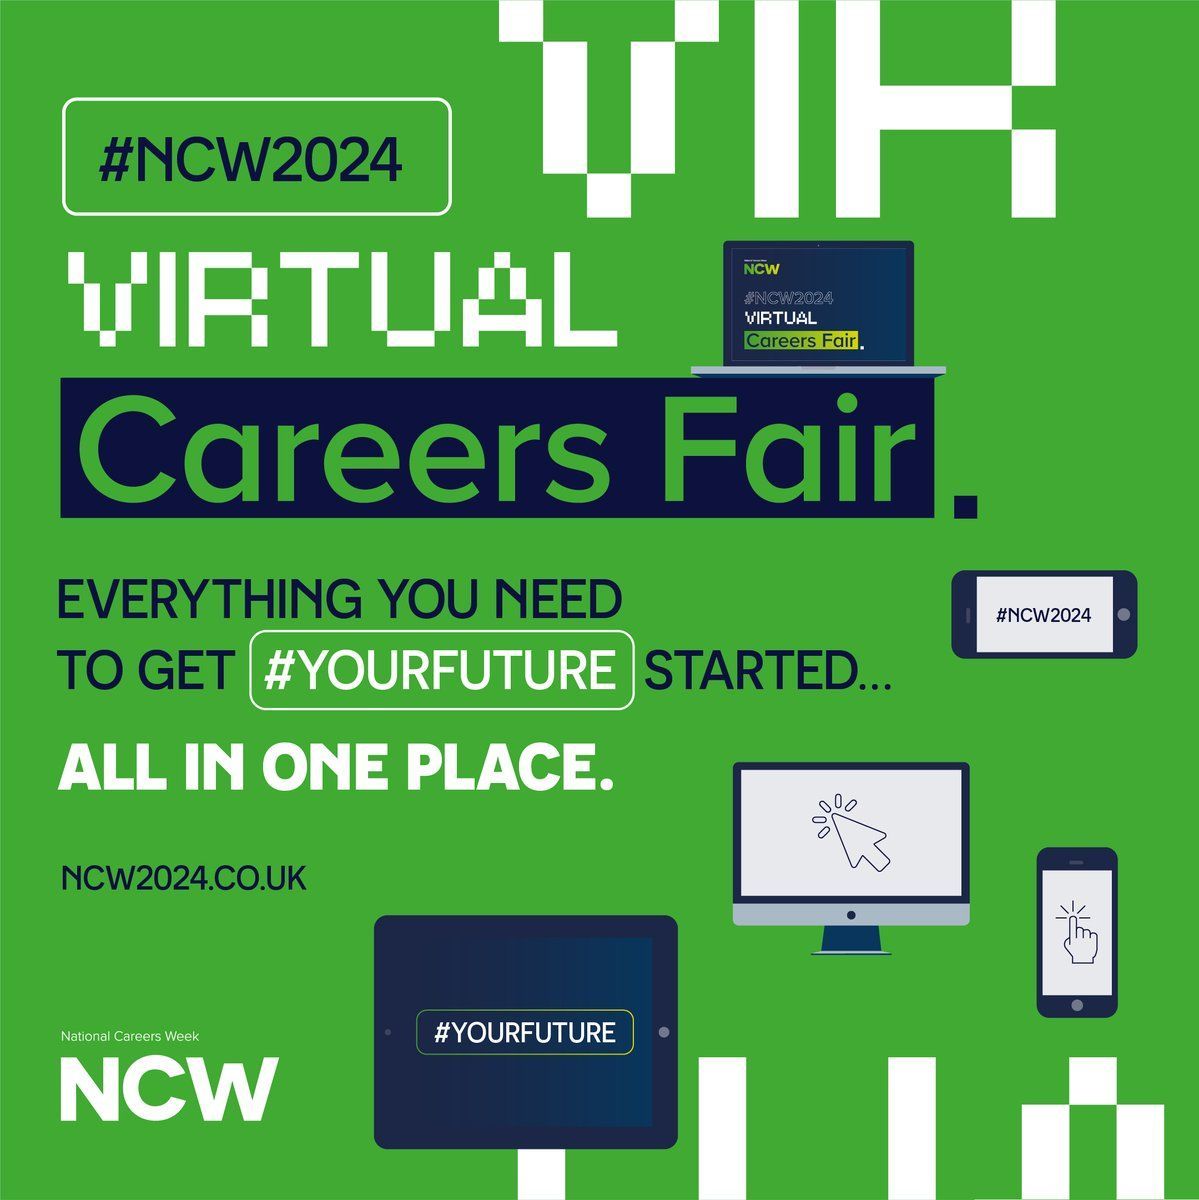 Everything you need to get #yourfuture started . . . . 

Explore our 𝙑𝙞𝙧𝙩𝙪𝙖𝙡 𝘾𝙖𝙧𝙚𝙚𝙧𝙨 𝙁𝙖𝙞𝙧 👇

buff.ly/44zm9es 

#NCW24
NCW2024 
#NationalCareersWeek